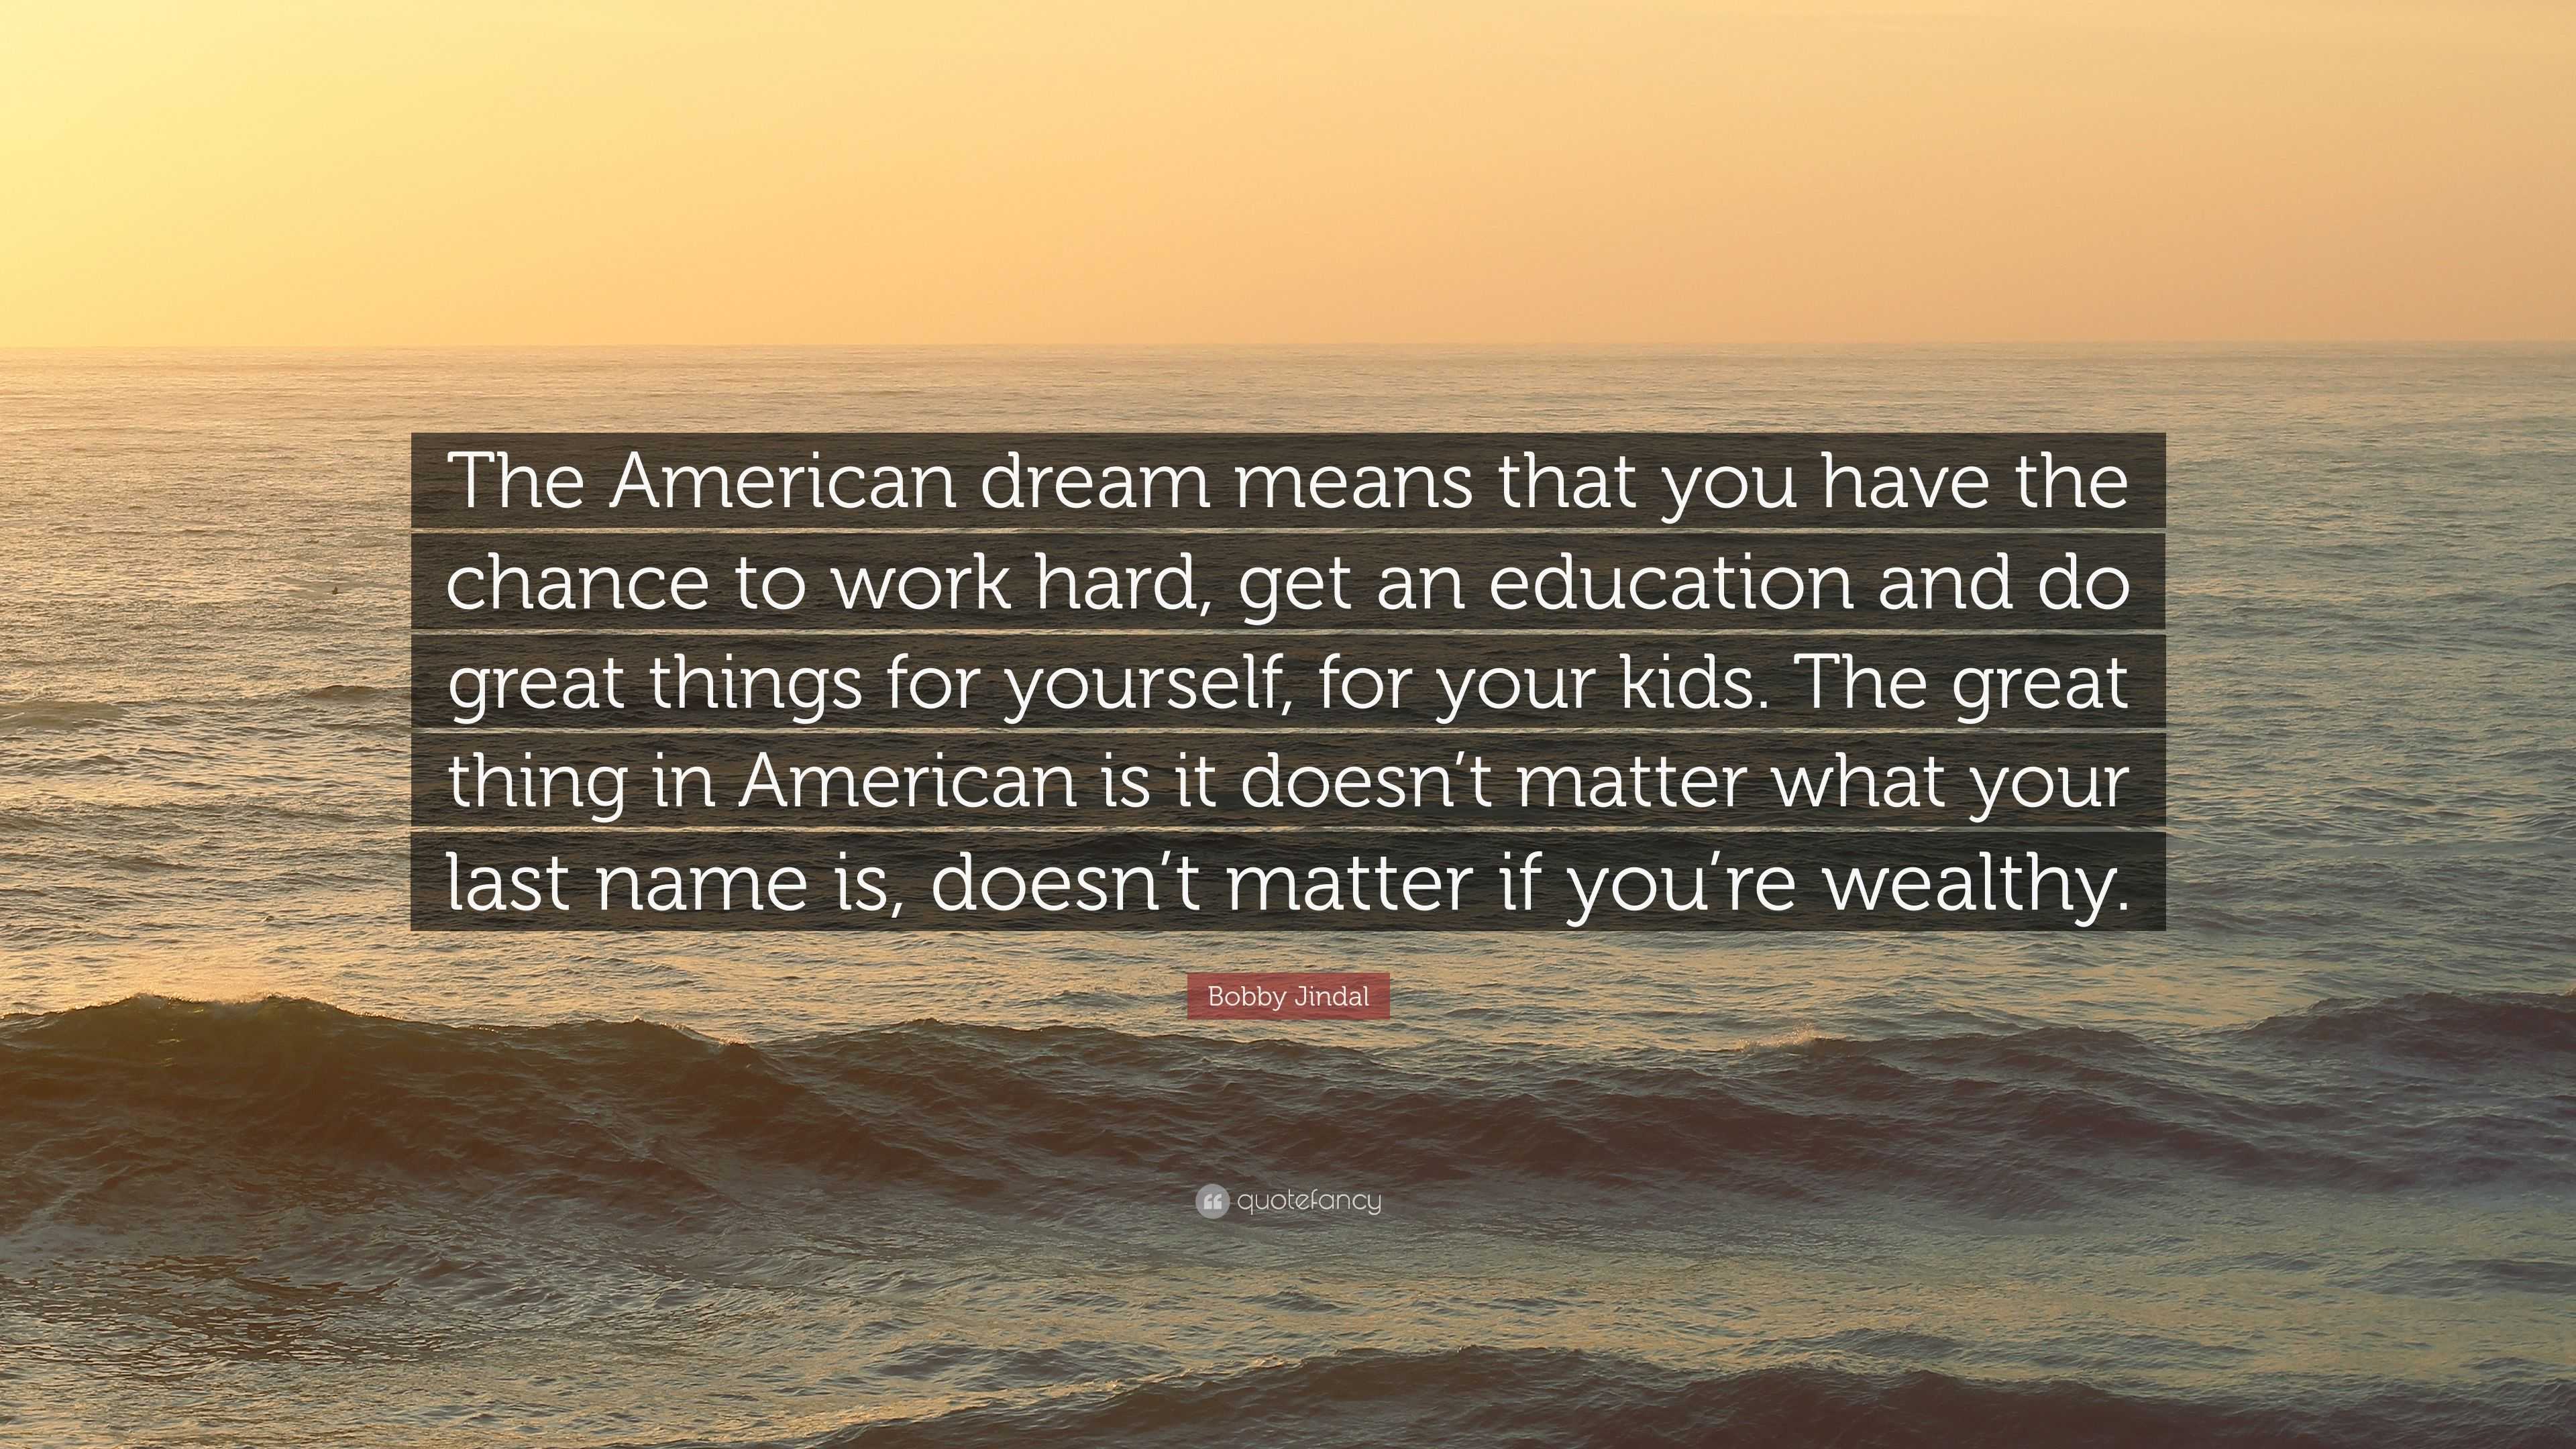 Bobby Jindal Quote: “The American dream means that you have the chance ...
